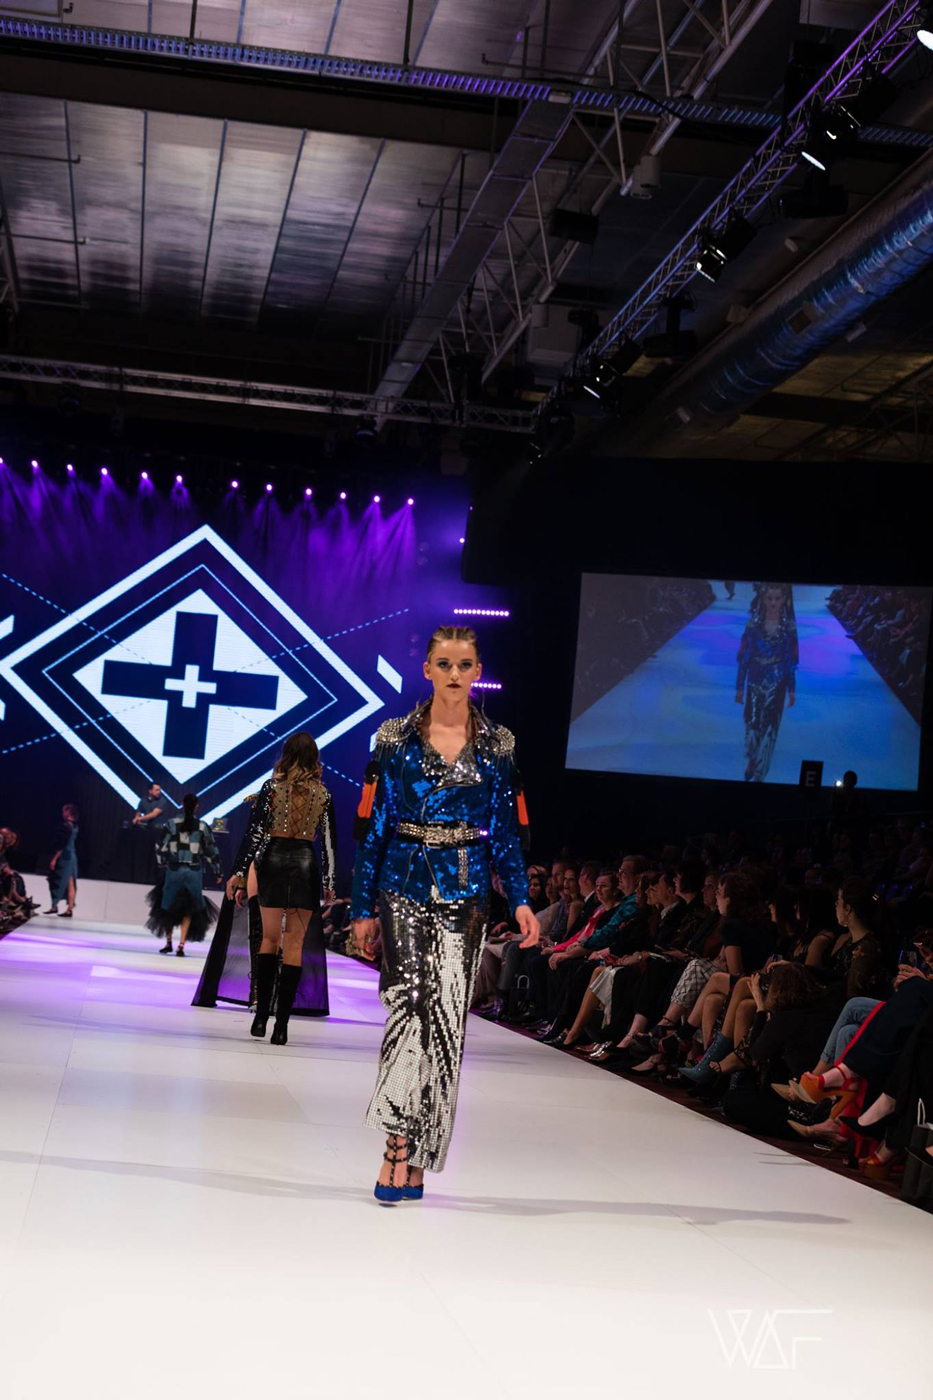 FashFest Runway Stage Event Lighting and LED Screens